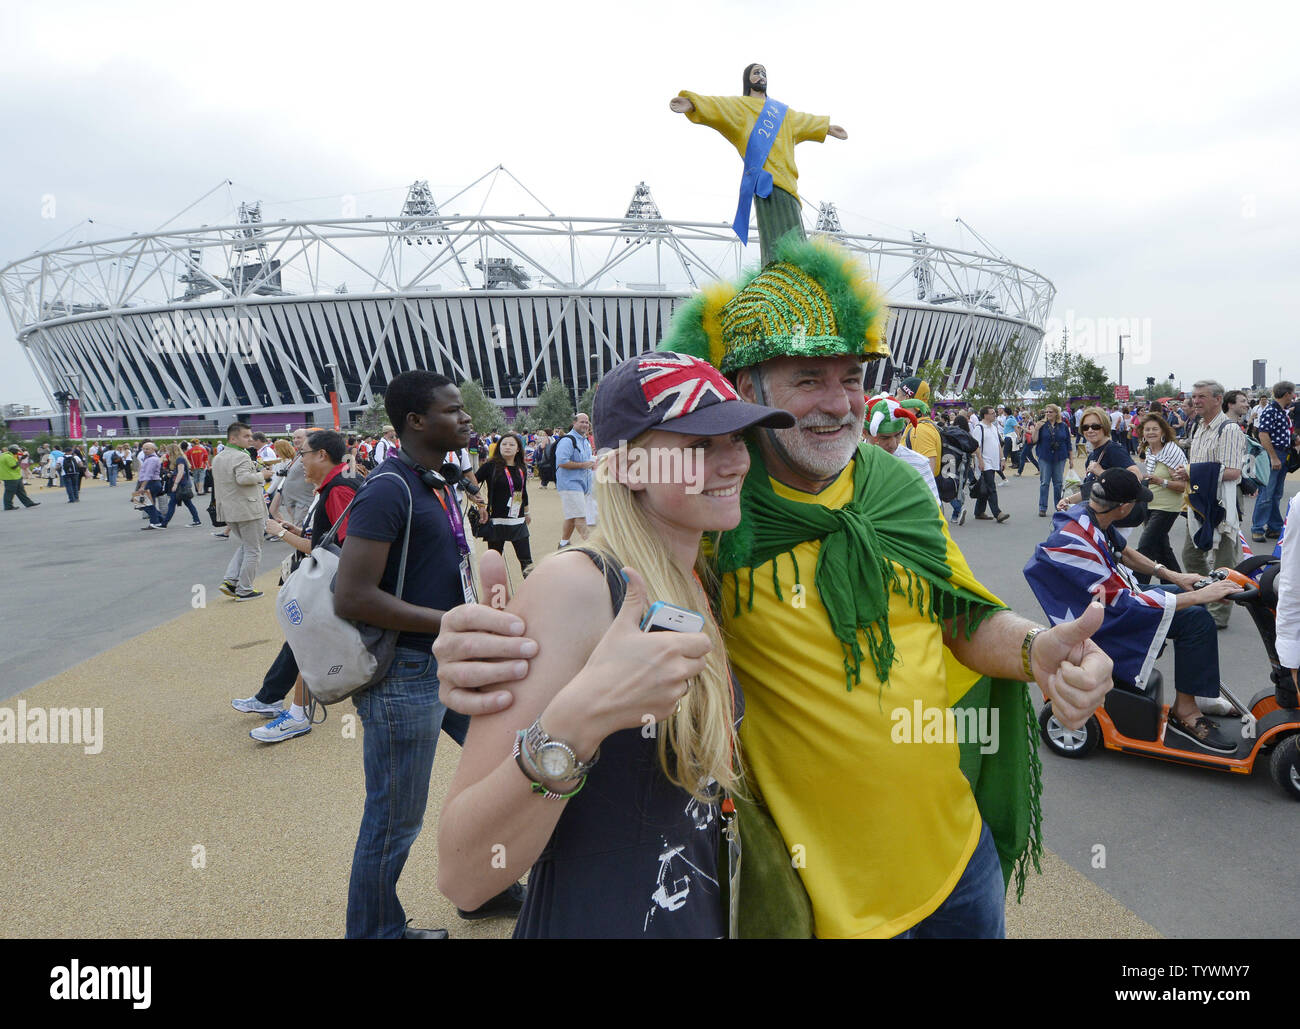 Olympic fans Nesta Wigan (L) and Amadeu Russi of Brazil pose for photos in front of the Olympic Stadium at the London 2012 Summer Olympics on July 27, 2012 in Stratford, London.   UPI/Brian Kersey Stock Photo